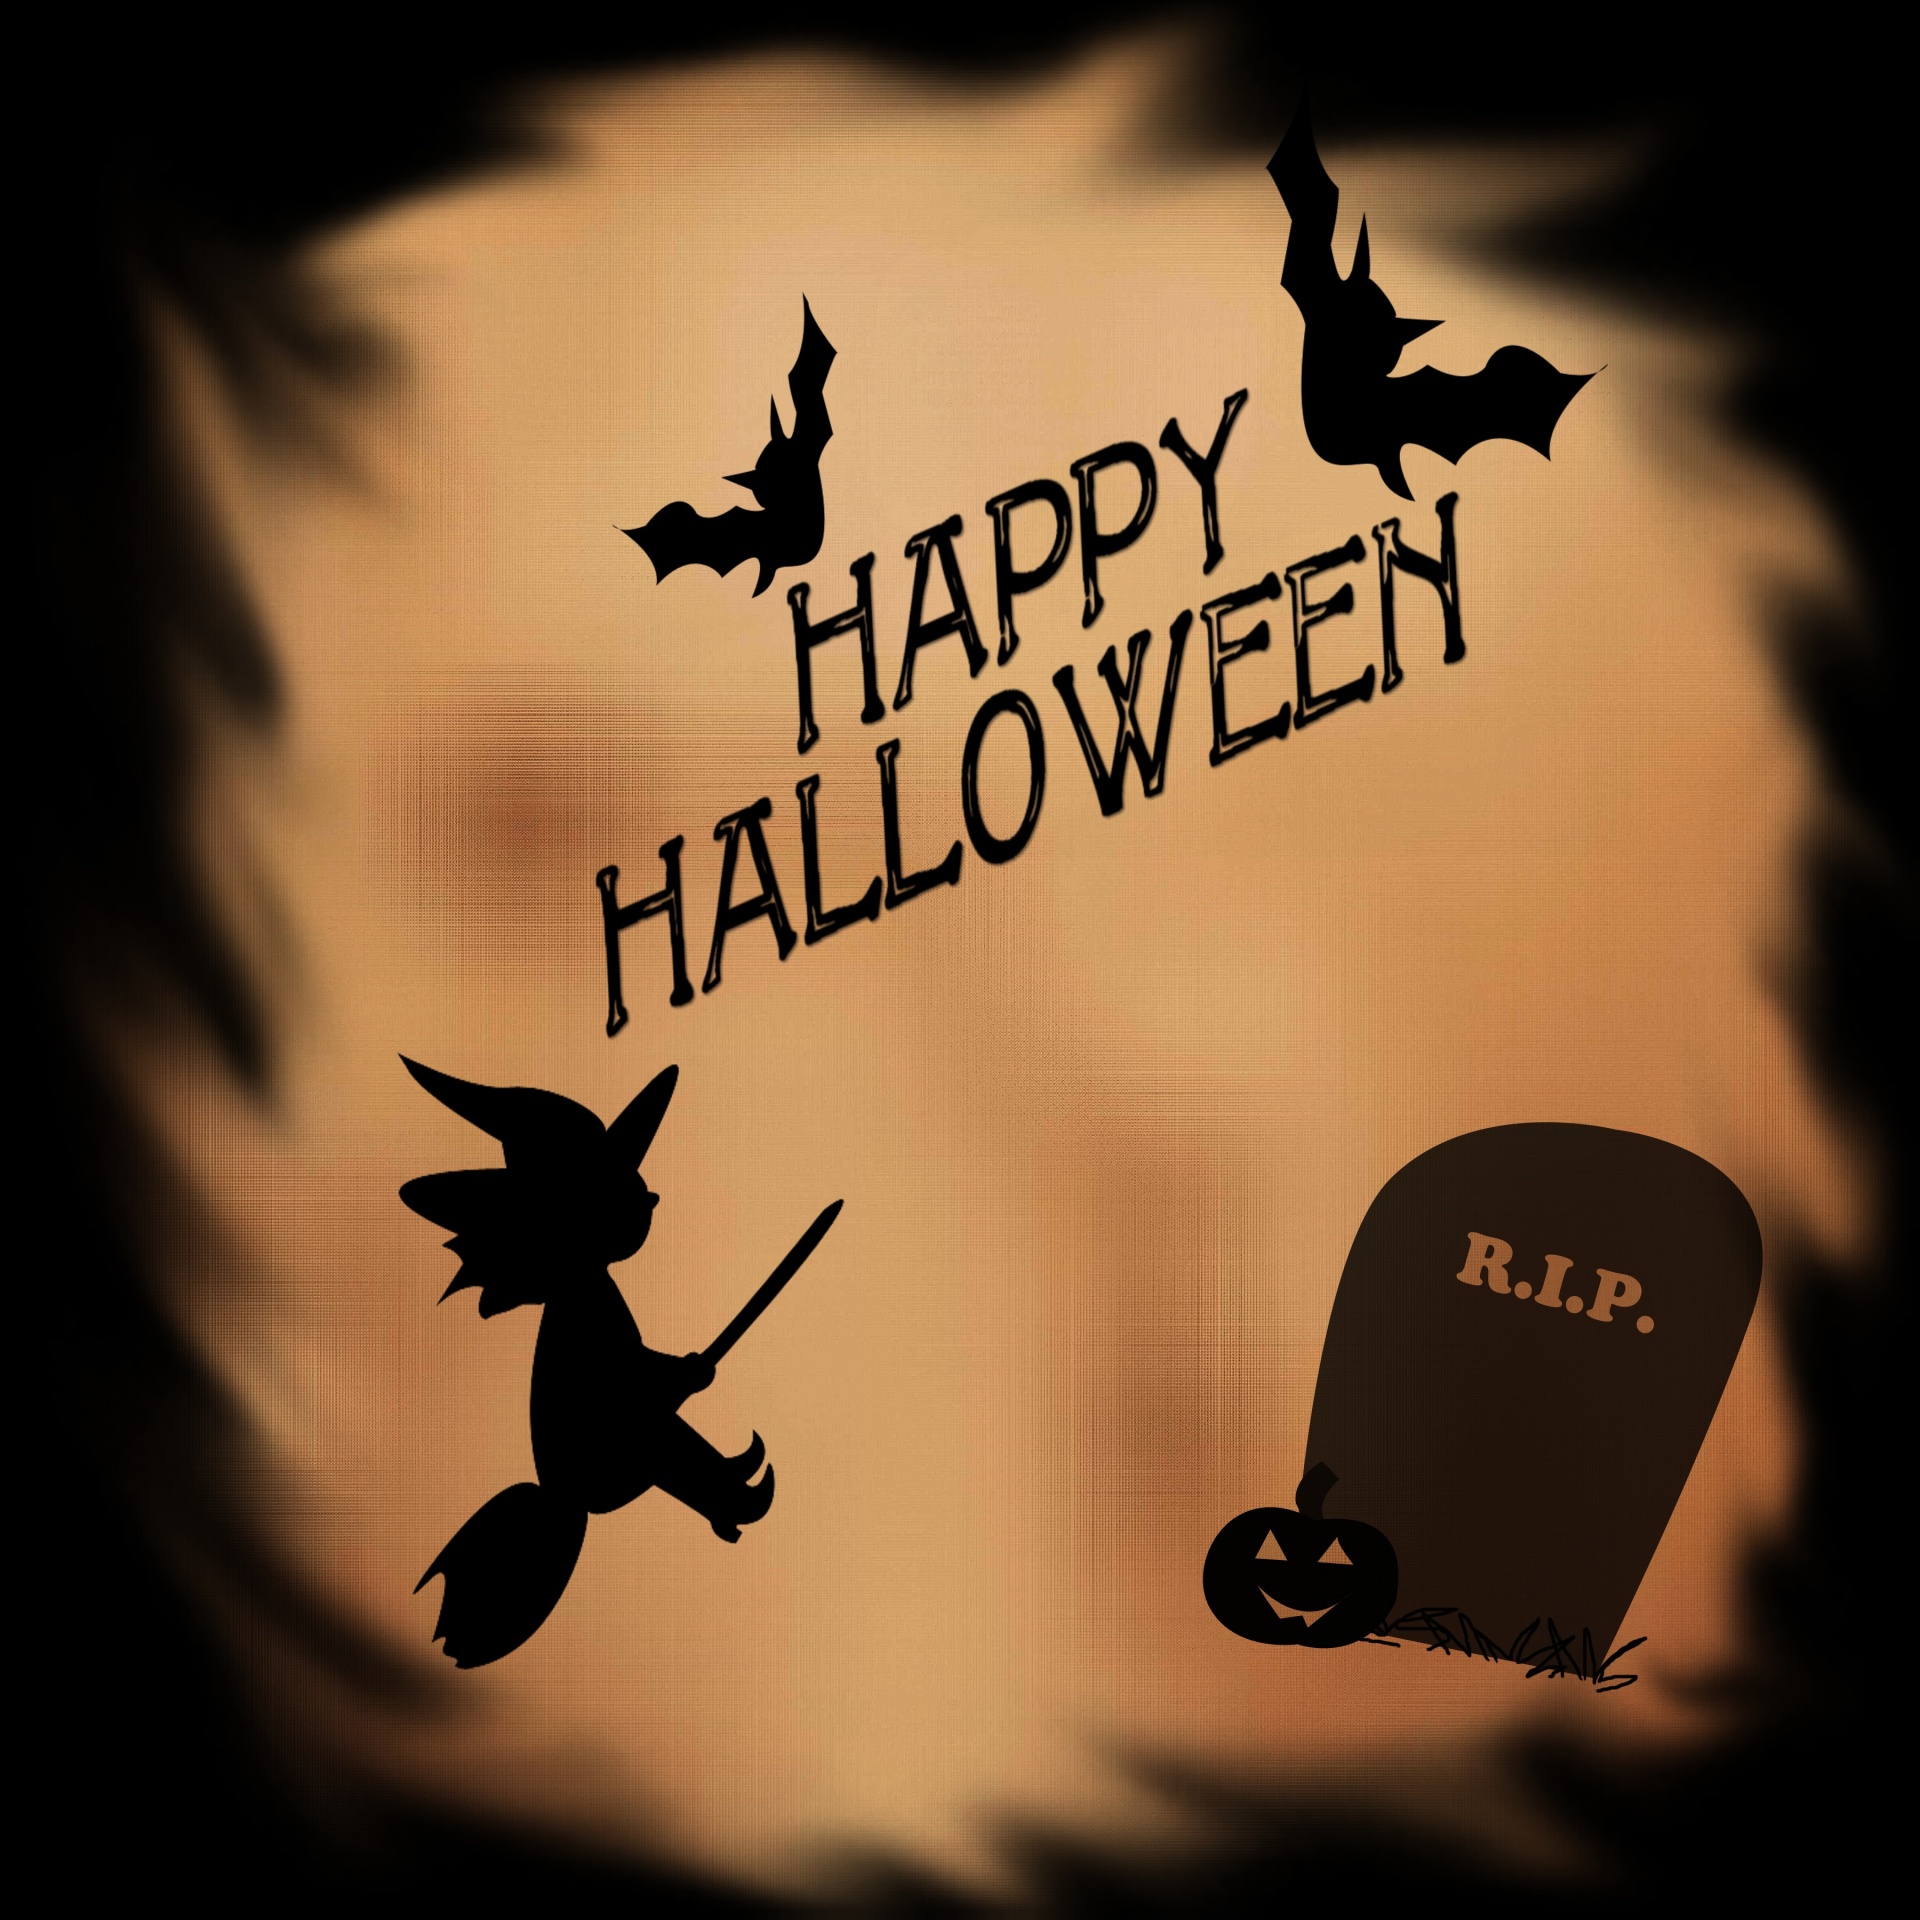 Poster design with the words Happy Halloween and drawings in black on a red background